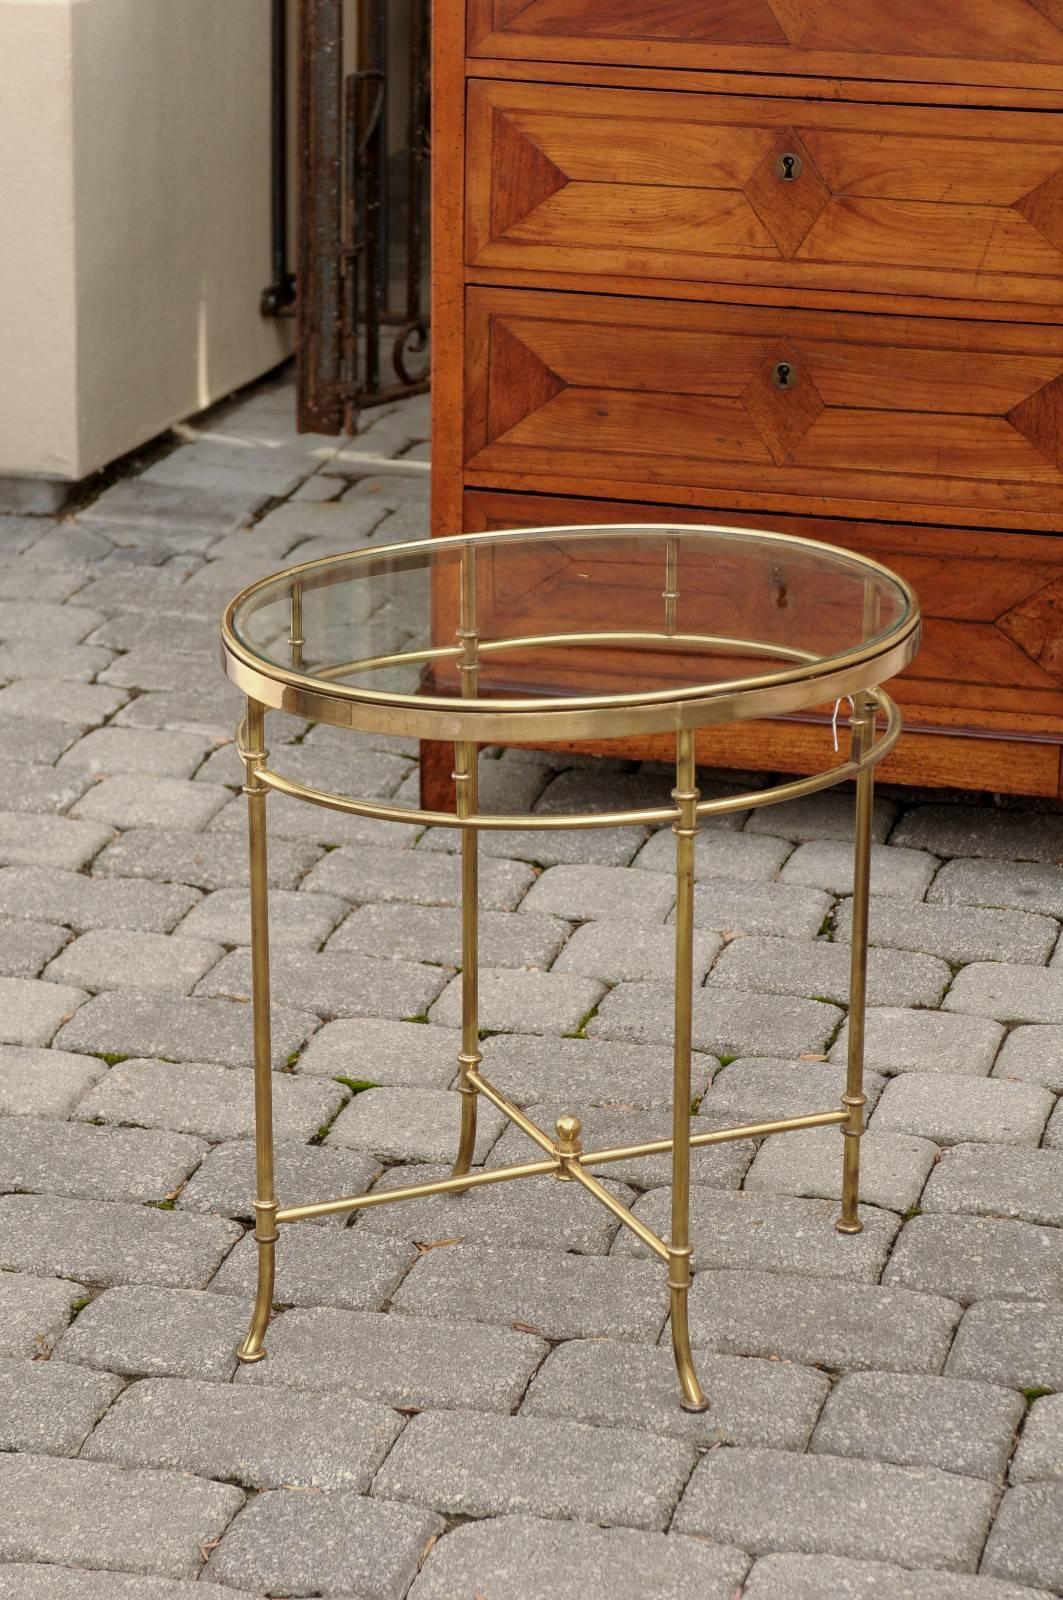 An Italian mid century brass and glass top oval side table. This Italian vintage side table features an oval glass top set into a brass frame. Four thin legs support the structure. They are connected at the top with a thin brass ring and at the